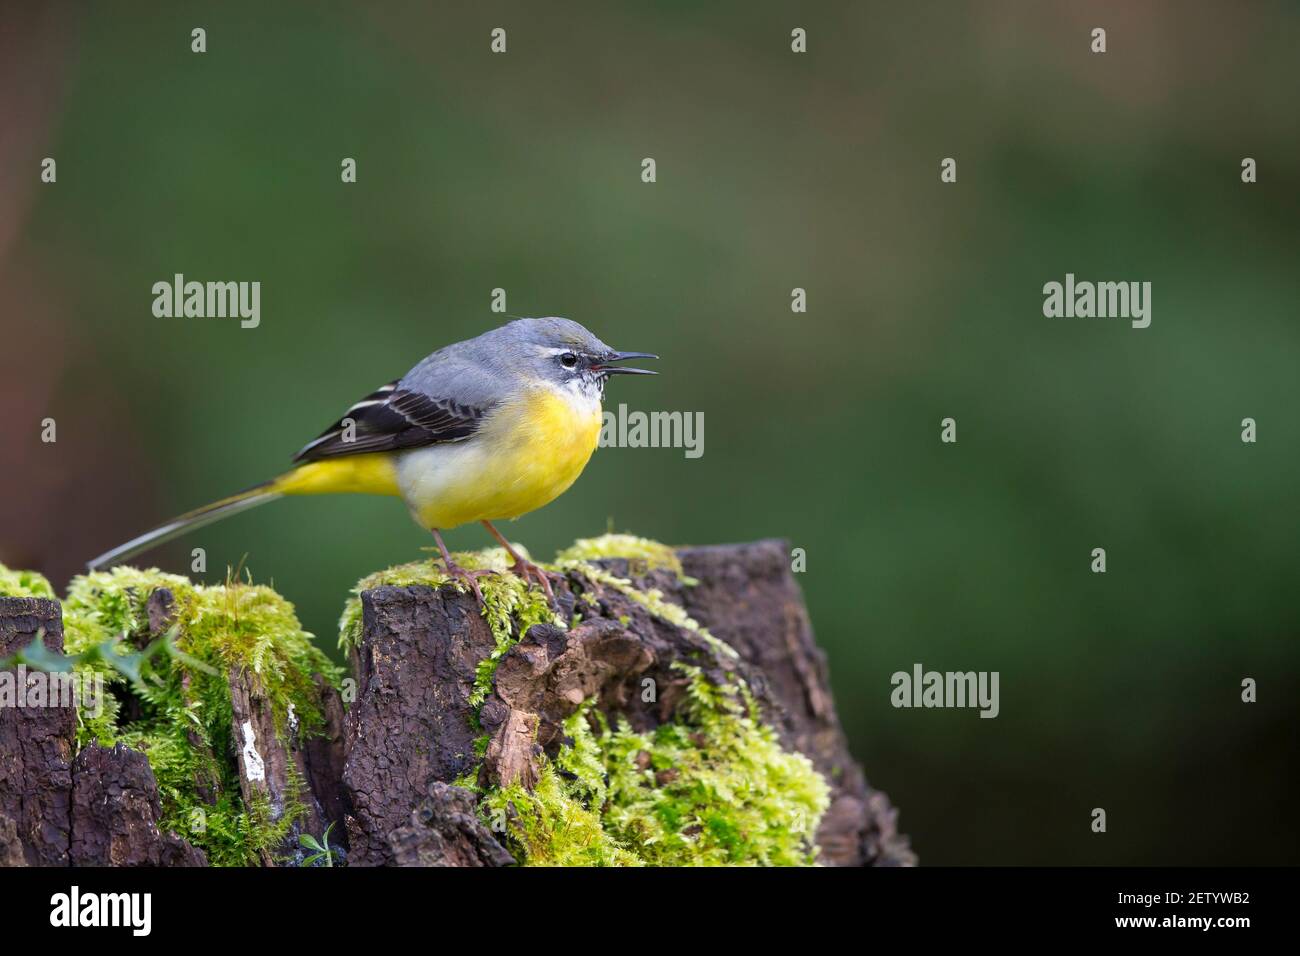 Close side view of a wild UK grey wagtail bird (Motacilla cinerea) standing isolated on moss-covered tree bark in winter woodland. Copy space to right. Stock Photo